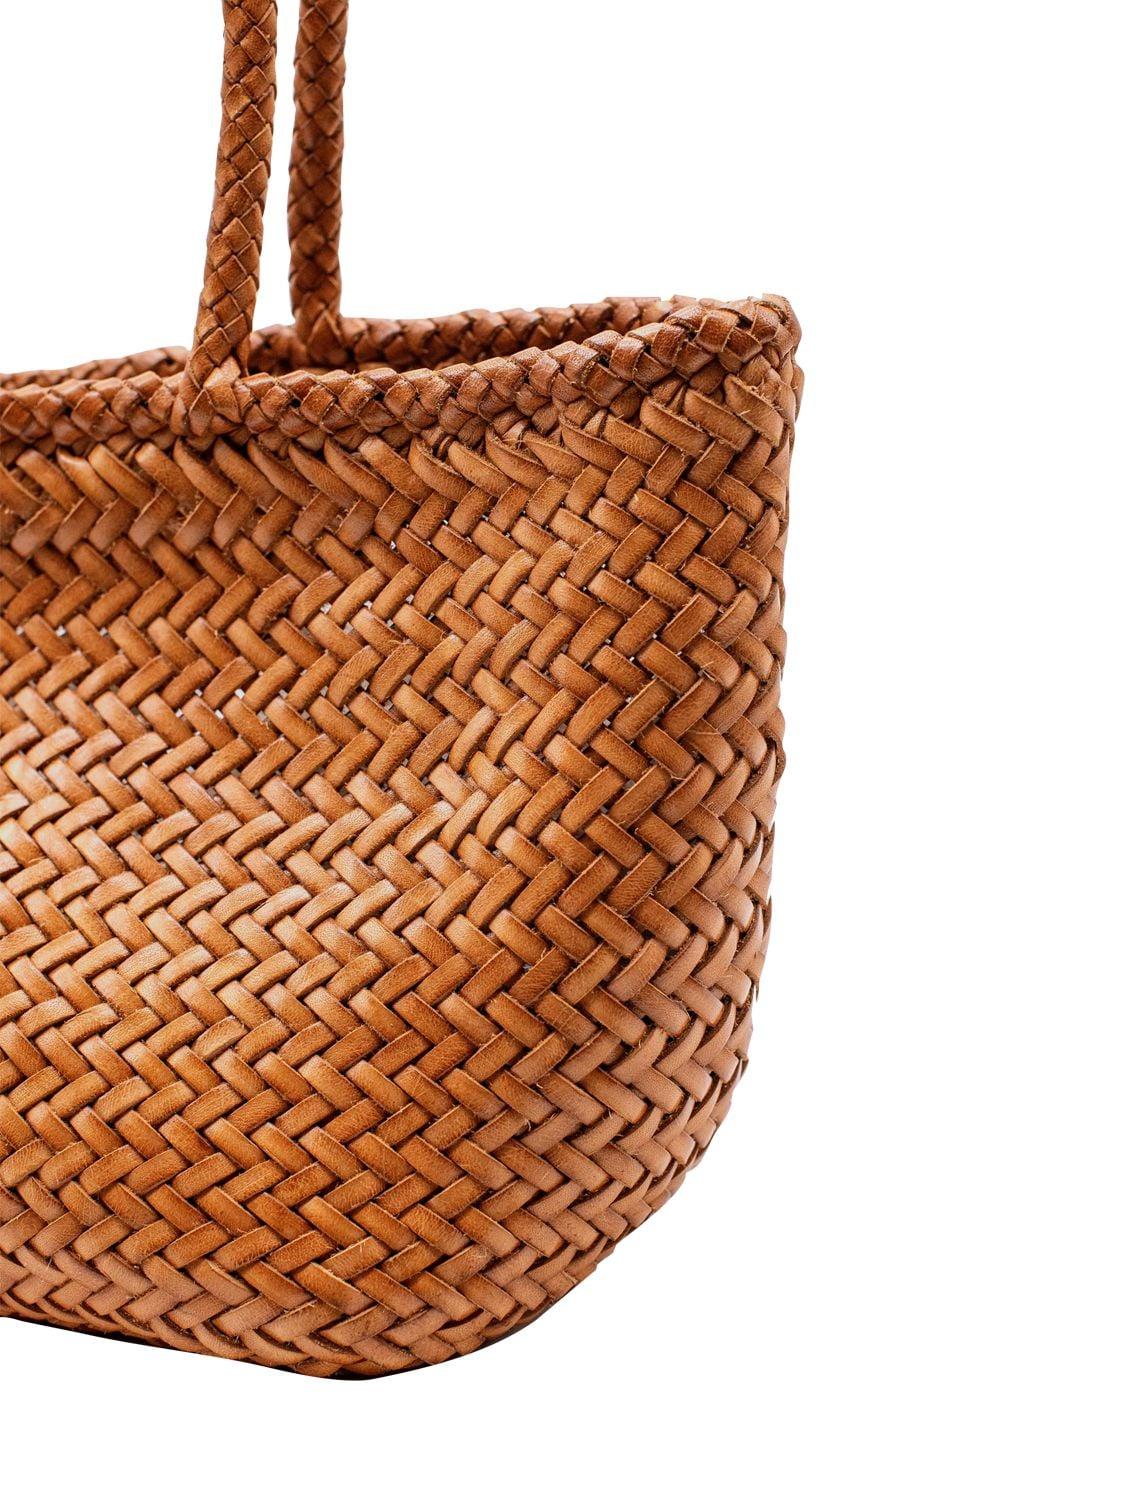 Brown Grace small woven-leather basket bag